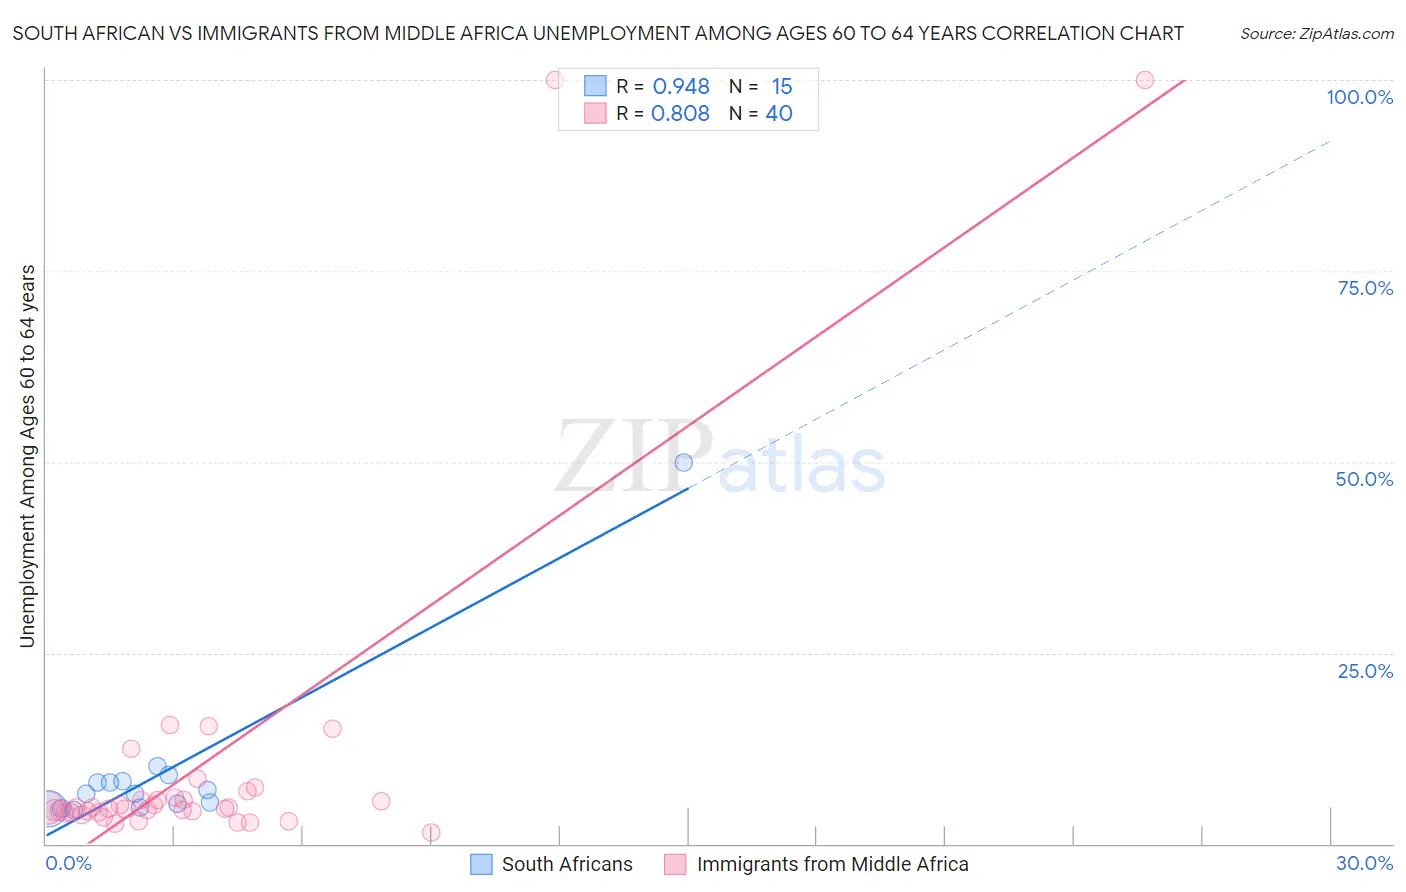 South African vs Immigrants from Middle Africa Unemployment Among Ages 60 to 64 years